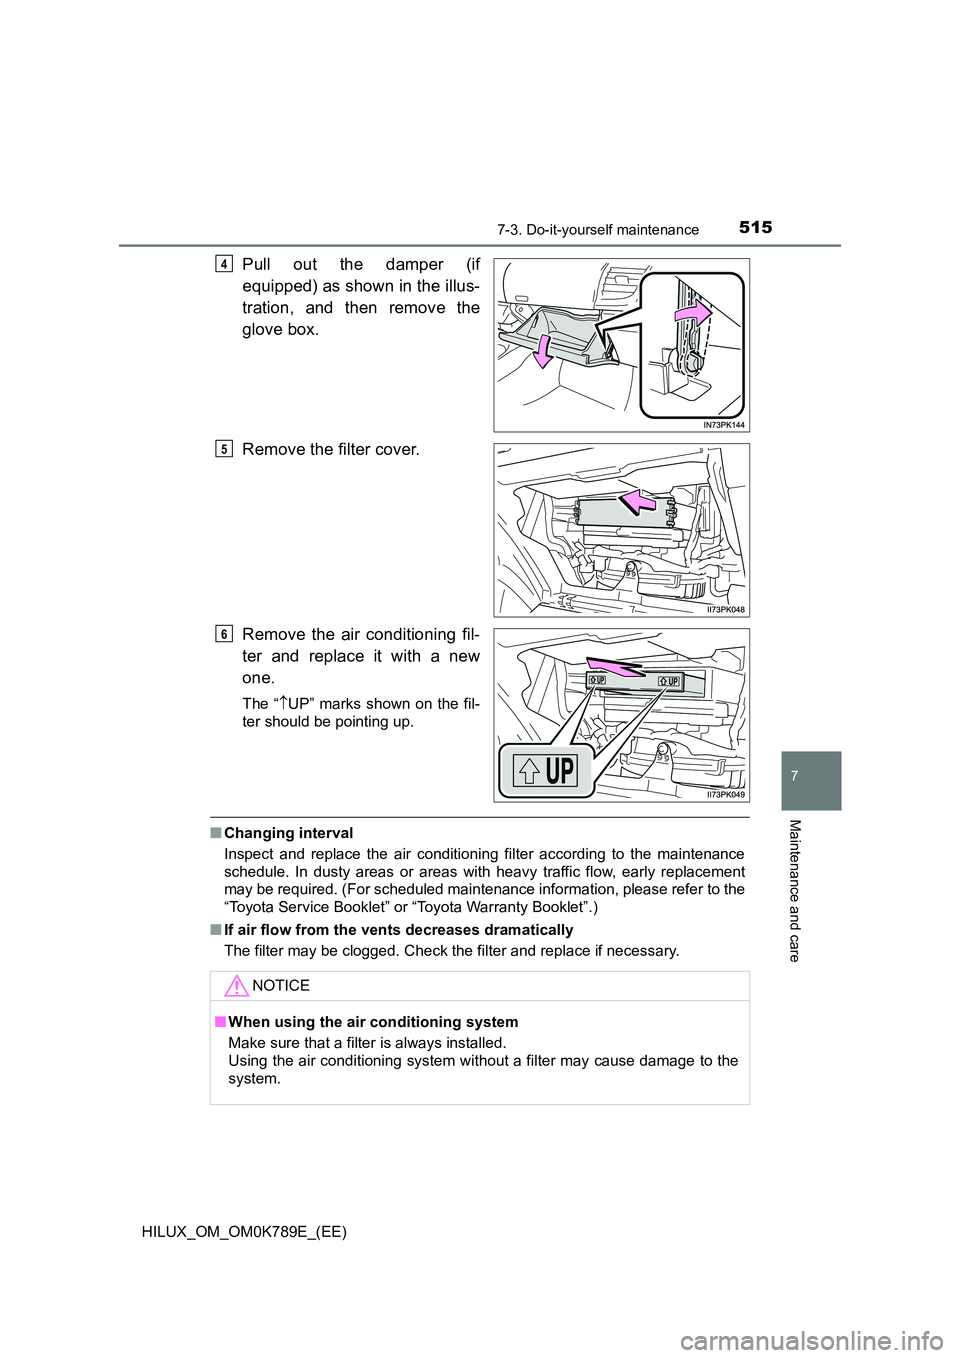 TOYOTA HILUX 2023  Owners Manual 5157-3. Do-it-yourself maintenance
HILUX_OM_OM0K789E_(EE)
7
Maintenance and care
Pull out the damper (if 
equipped) as shown in the illus- 
tration, and then remove the 
glove box. 
Remove the filter 